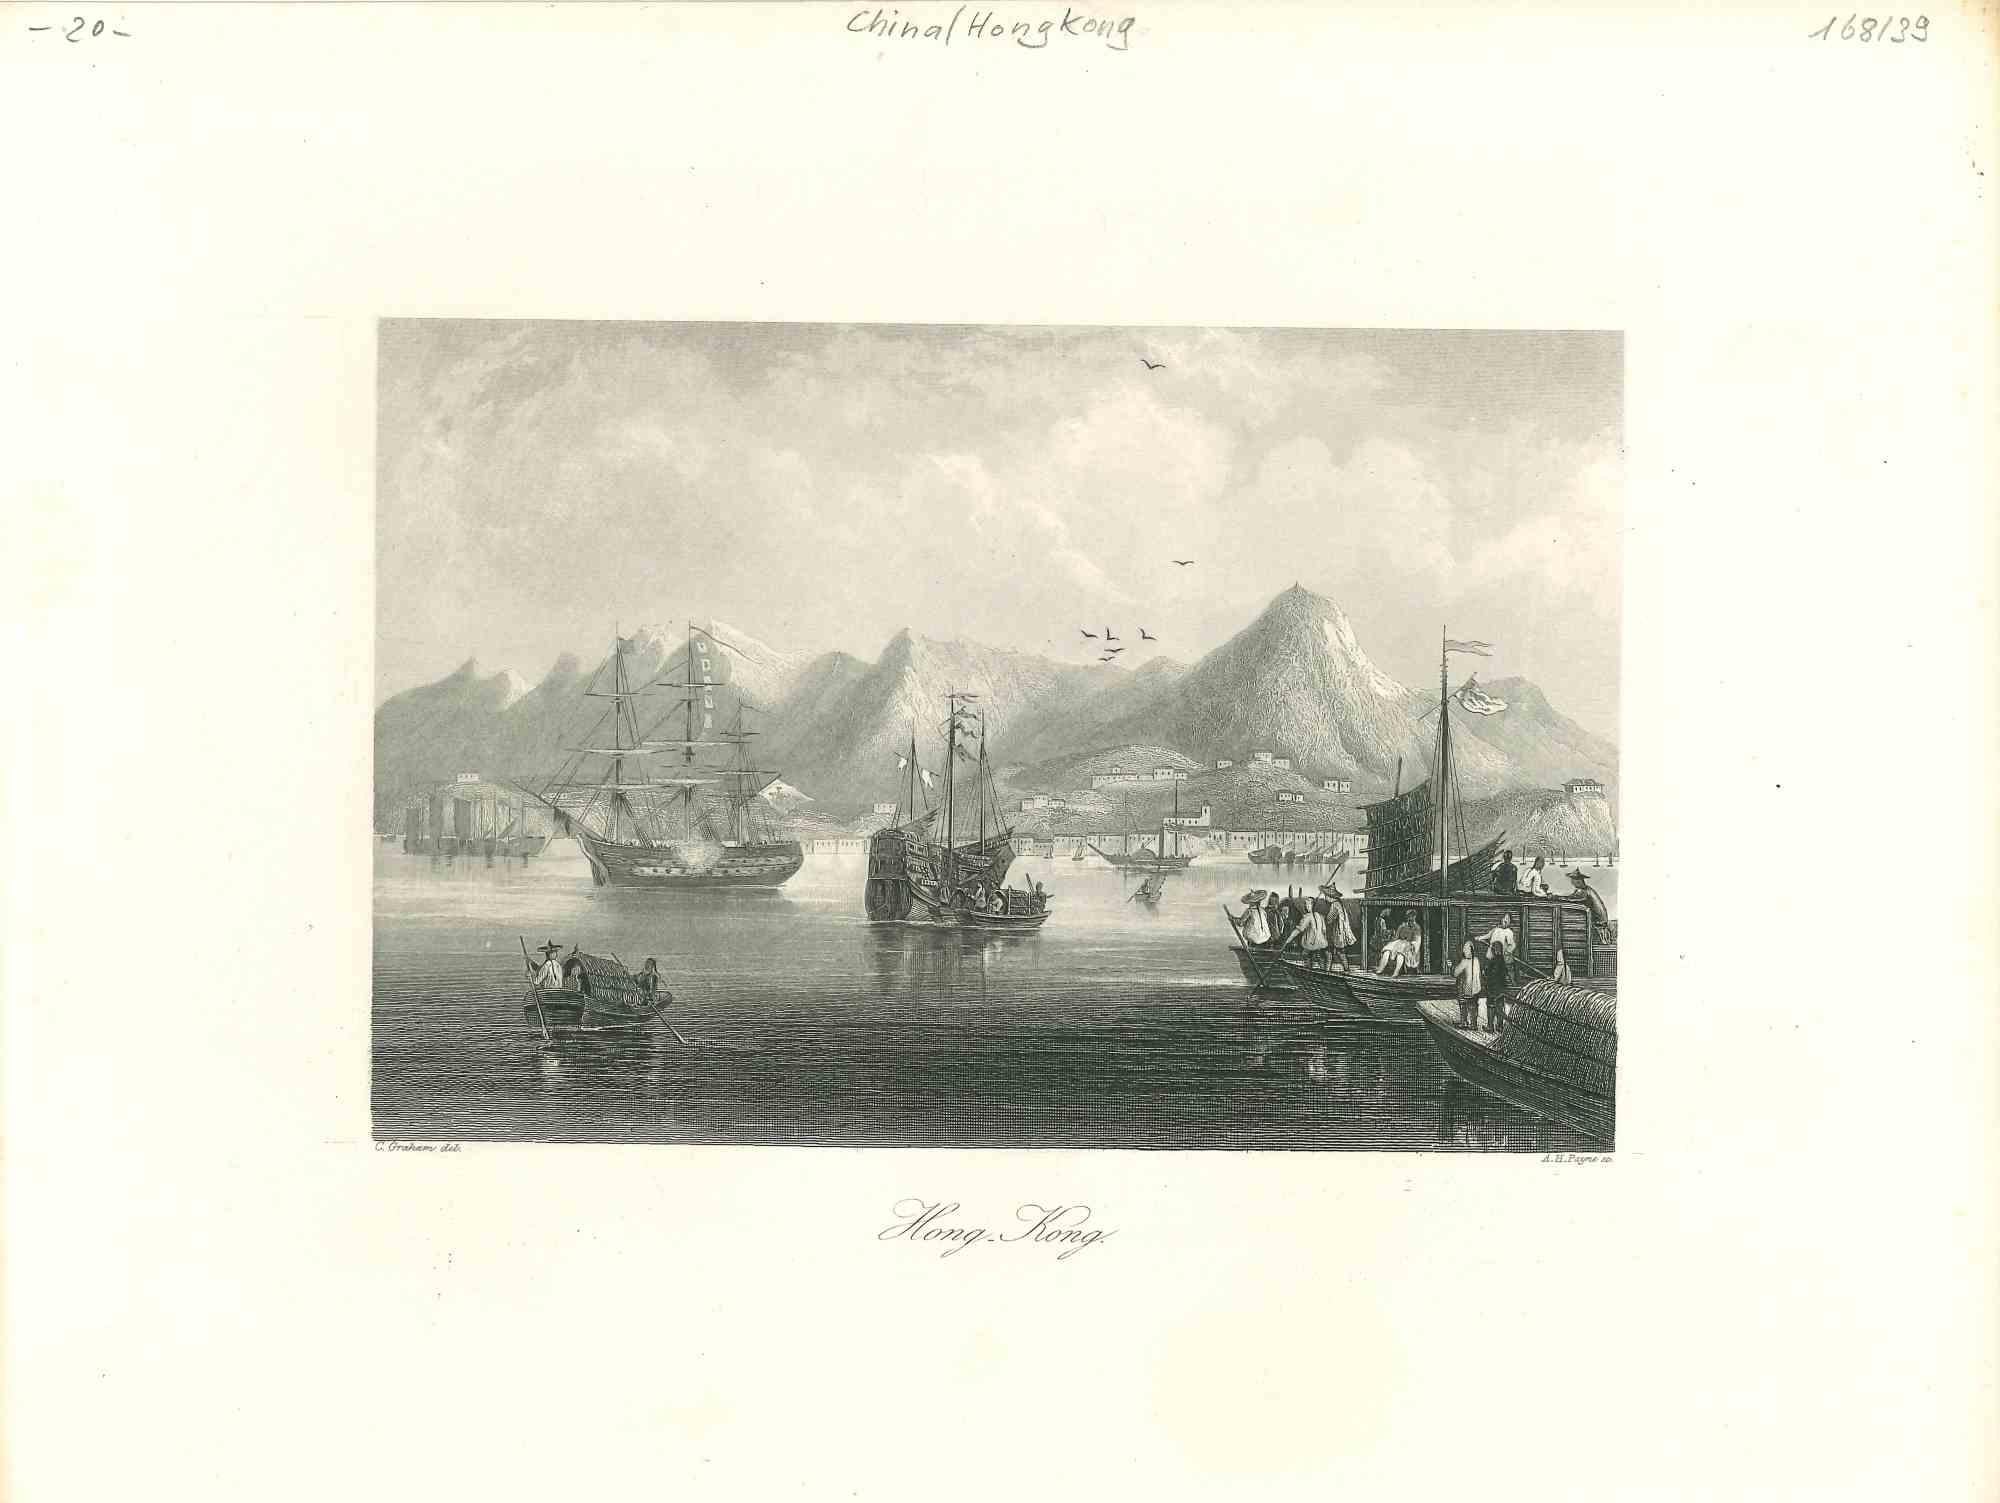 Unknown Figurative Print - Ancient View of Hong Kong - Original Lithograph - Early 19th Century